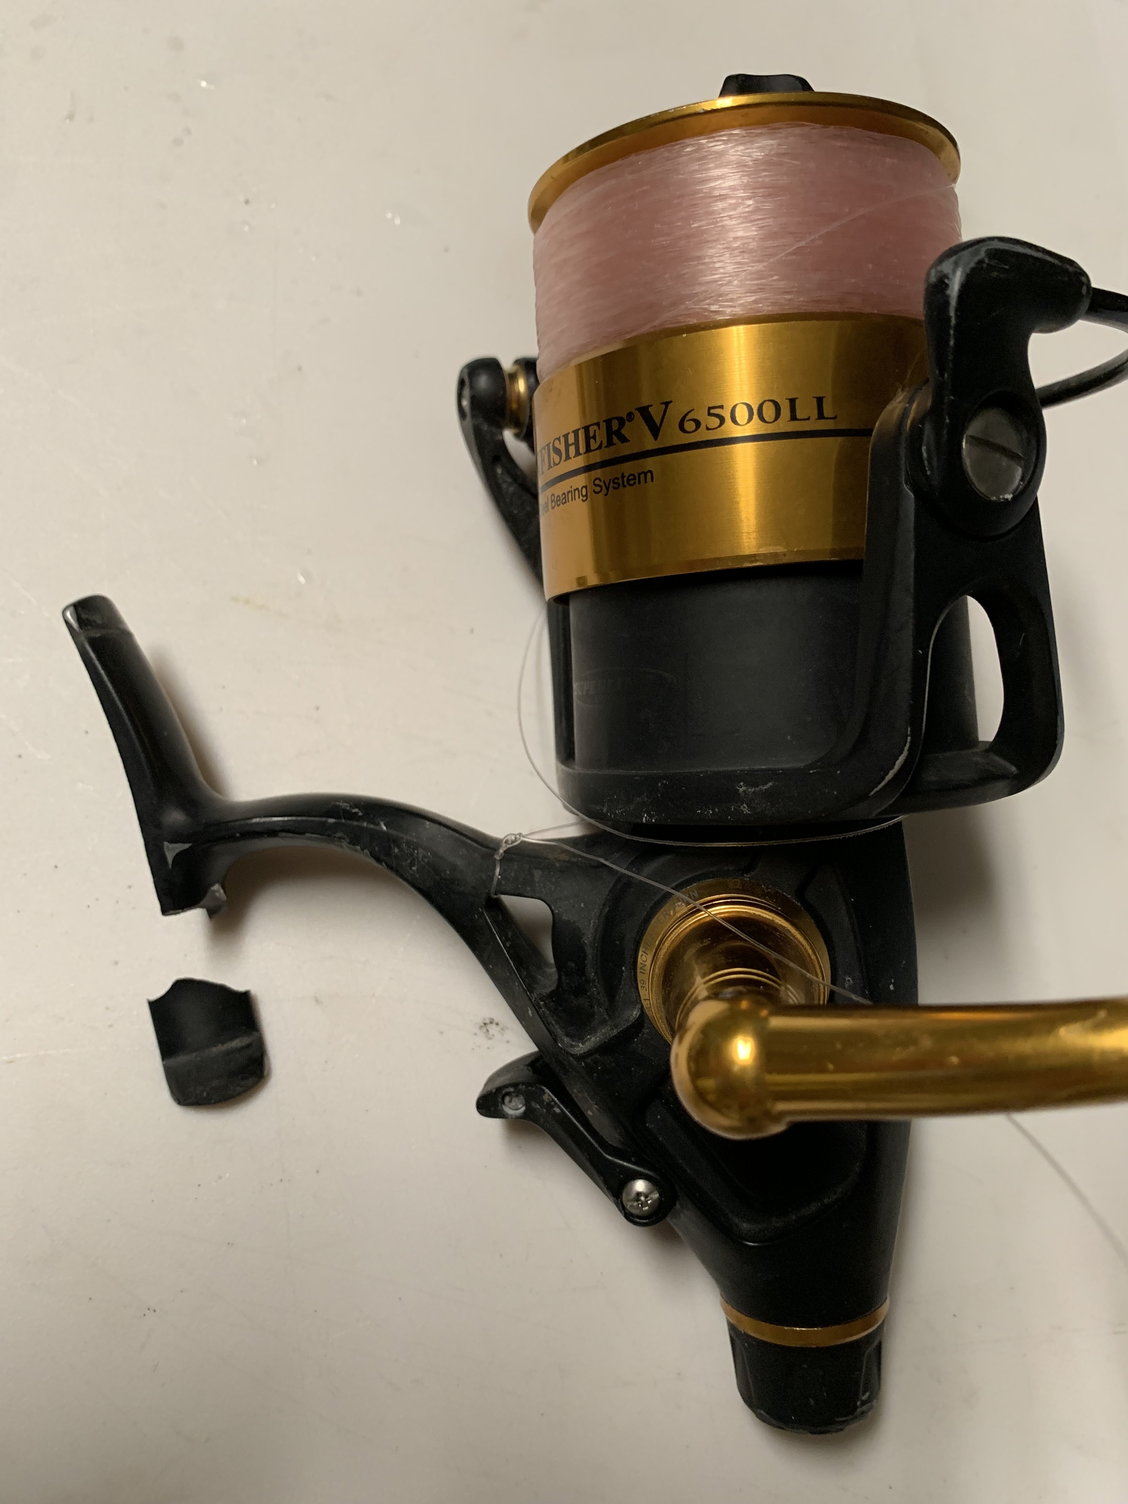 How good is Penn's Warranty- My Reel Cracked. - The Hull Truth